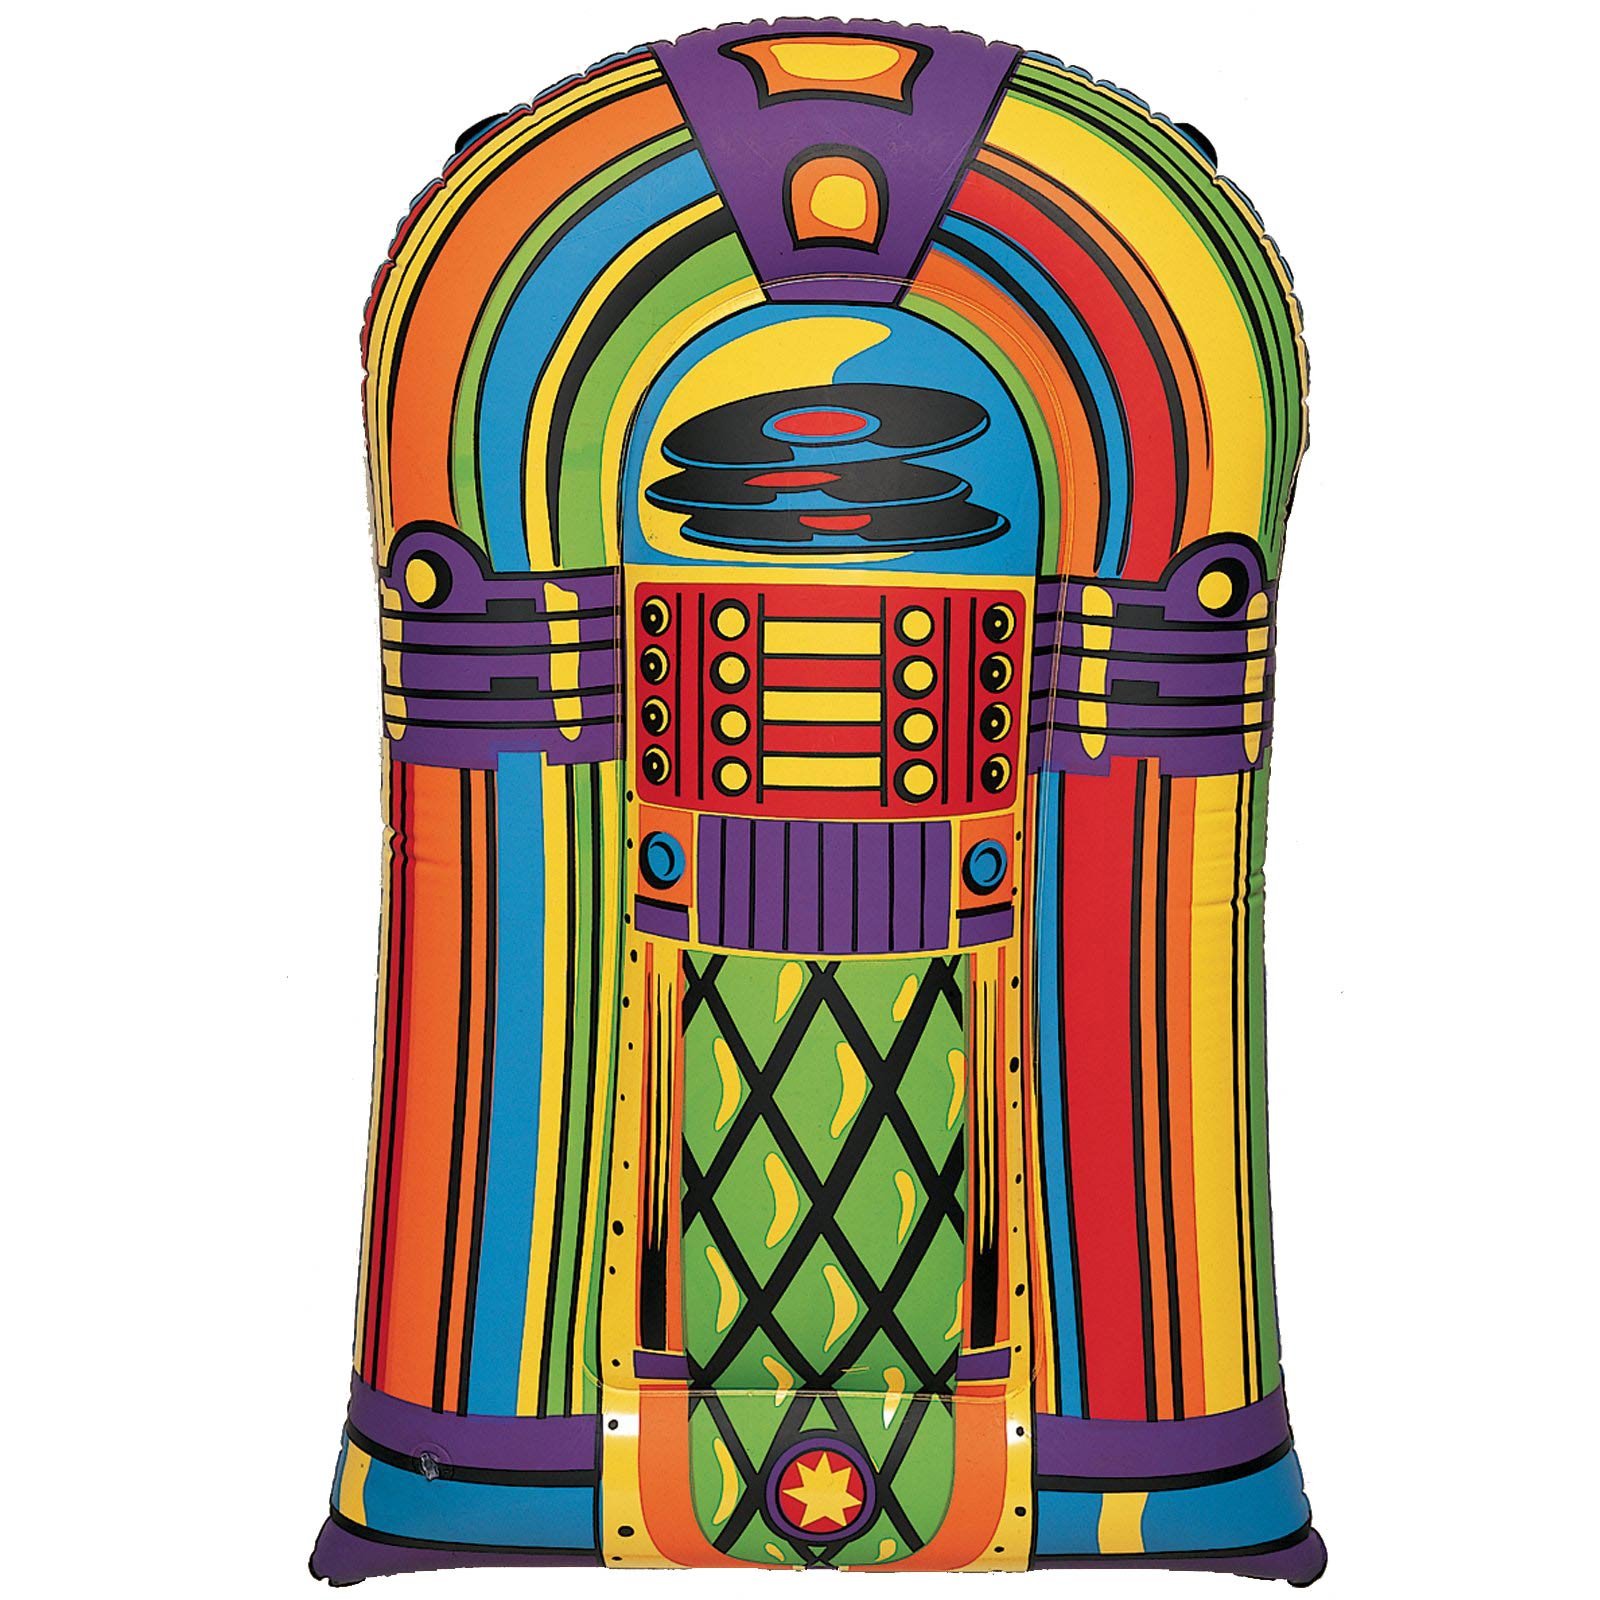 Picture Of A Jukebox - ClipArt Best